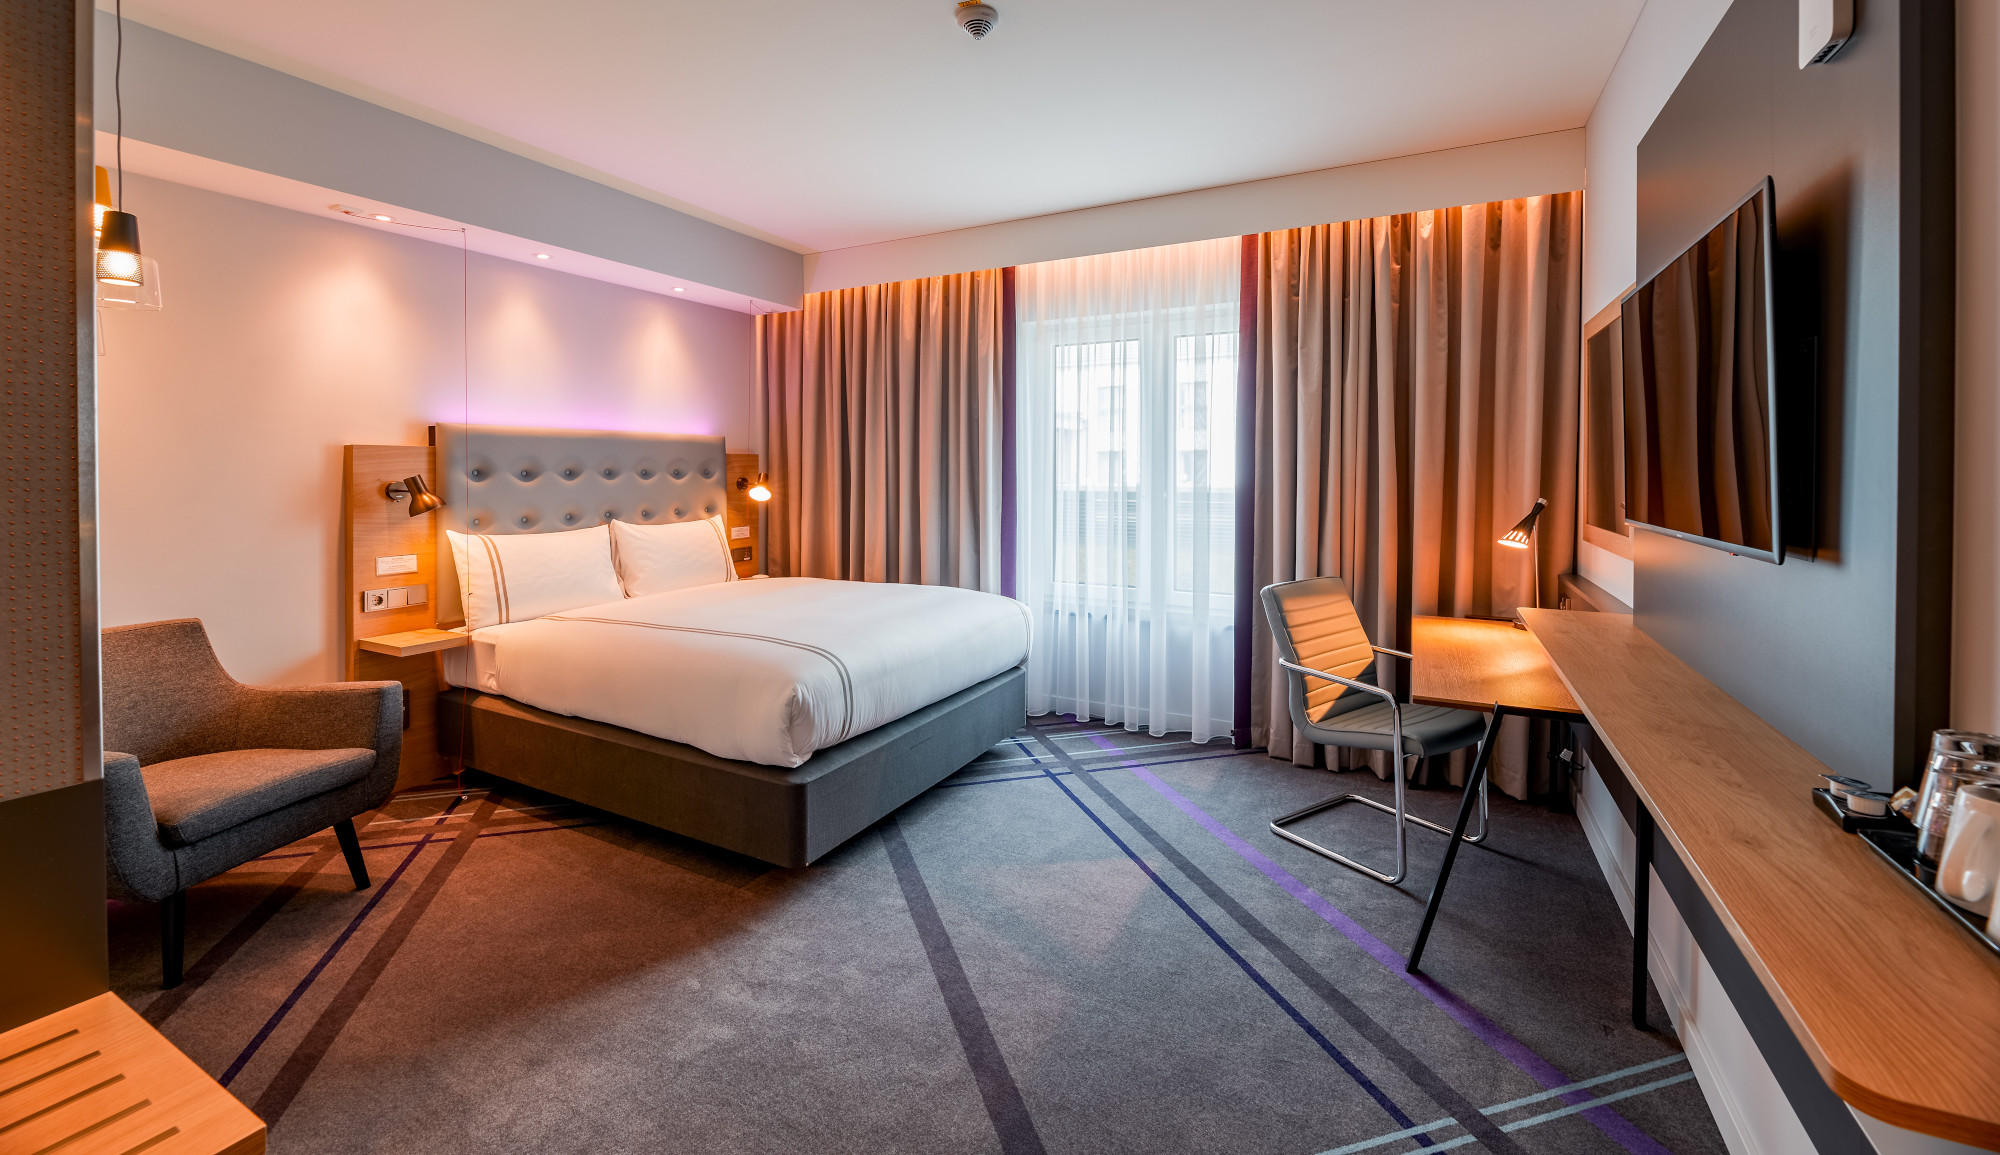 Premier Inn Munich Airport Sued hotel accessible bedroom with lowered bed